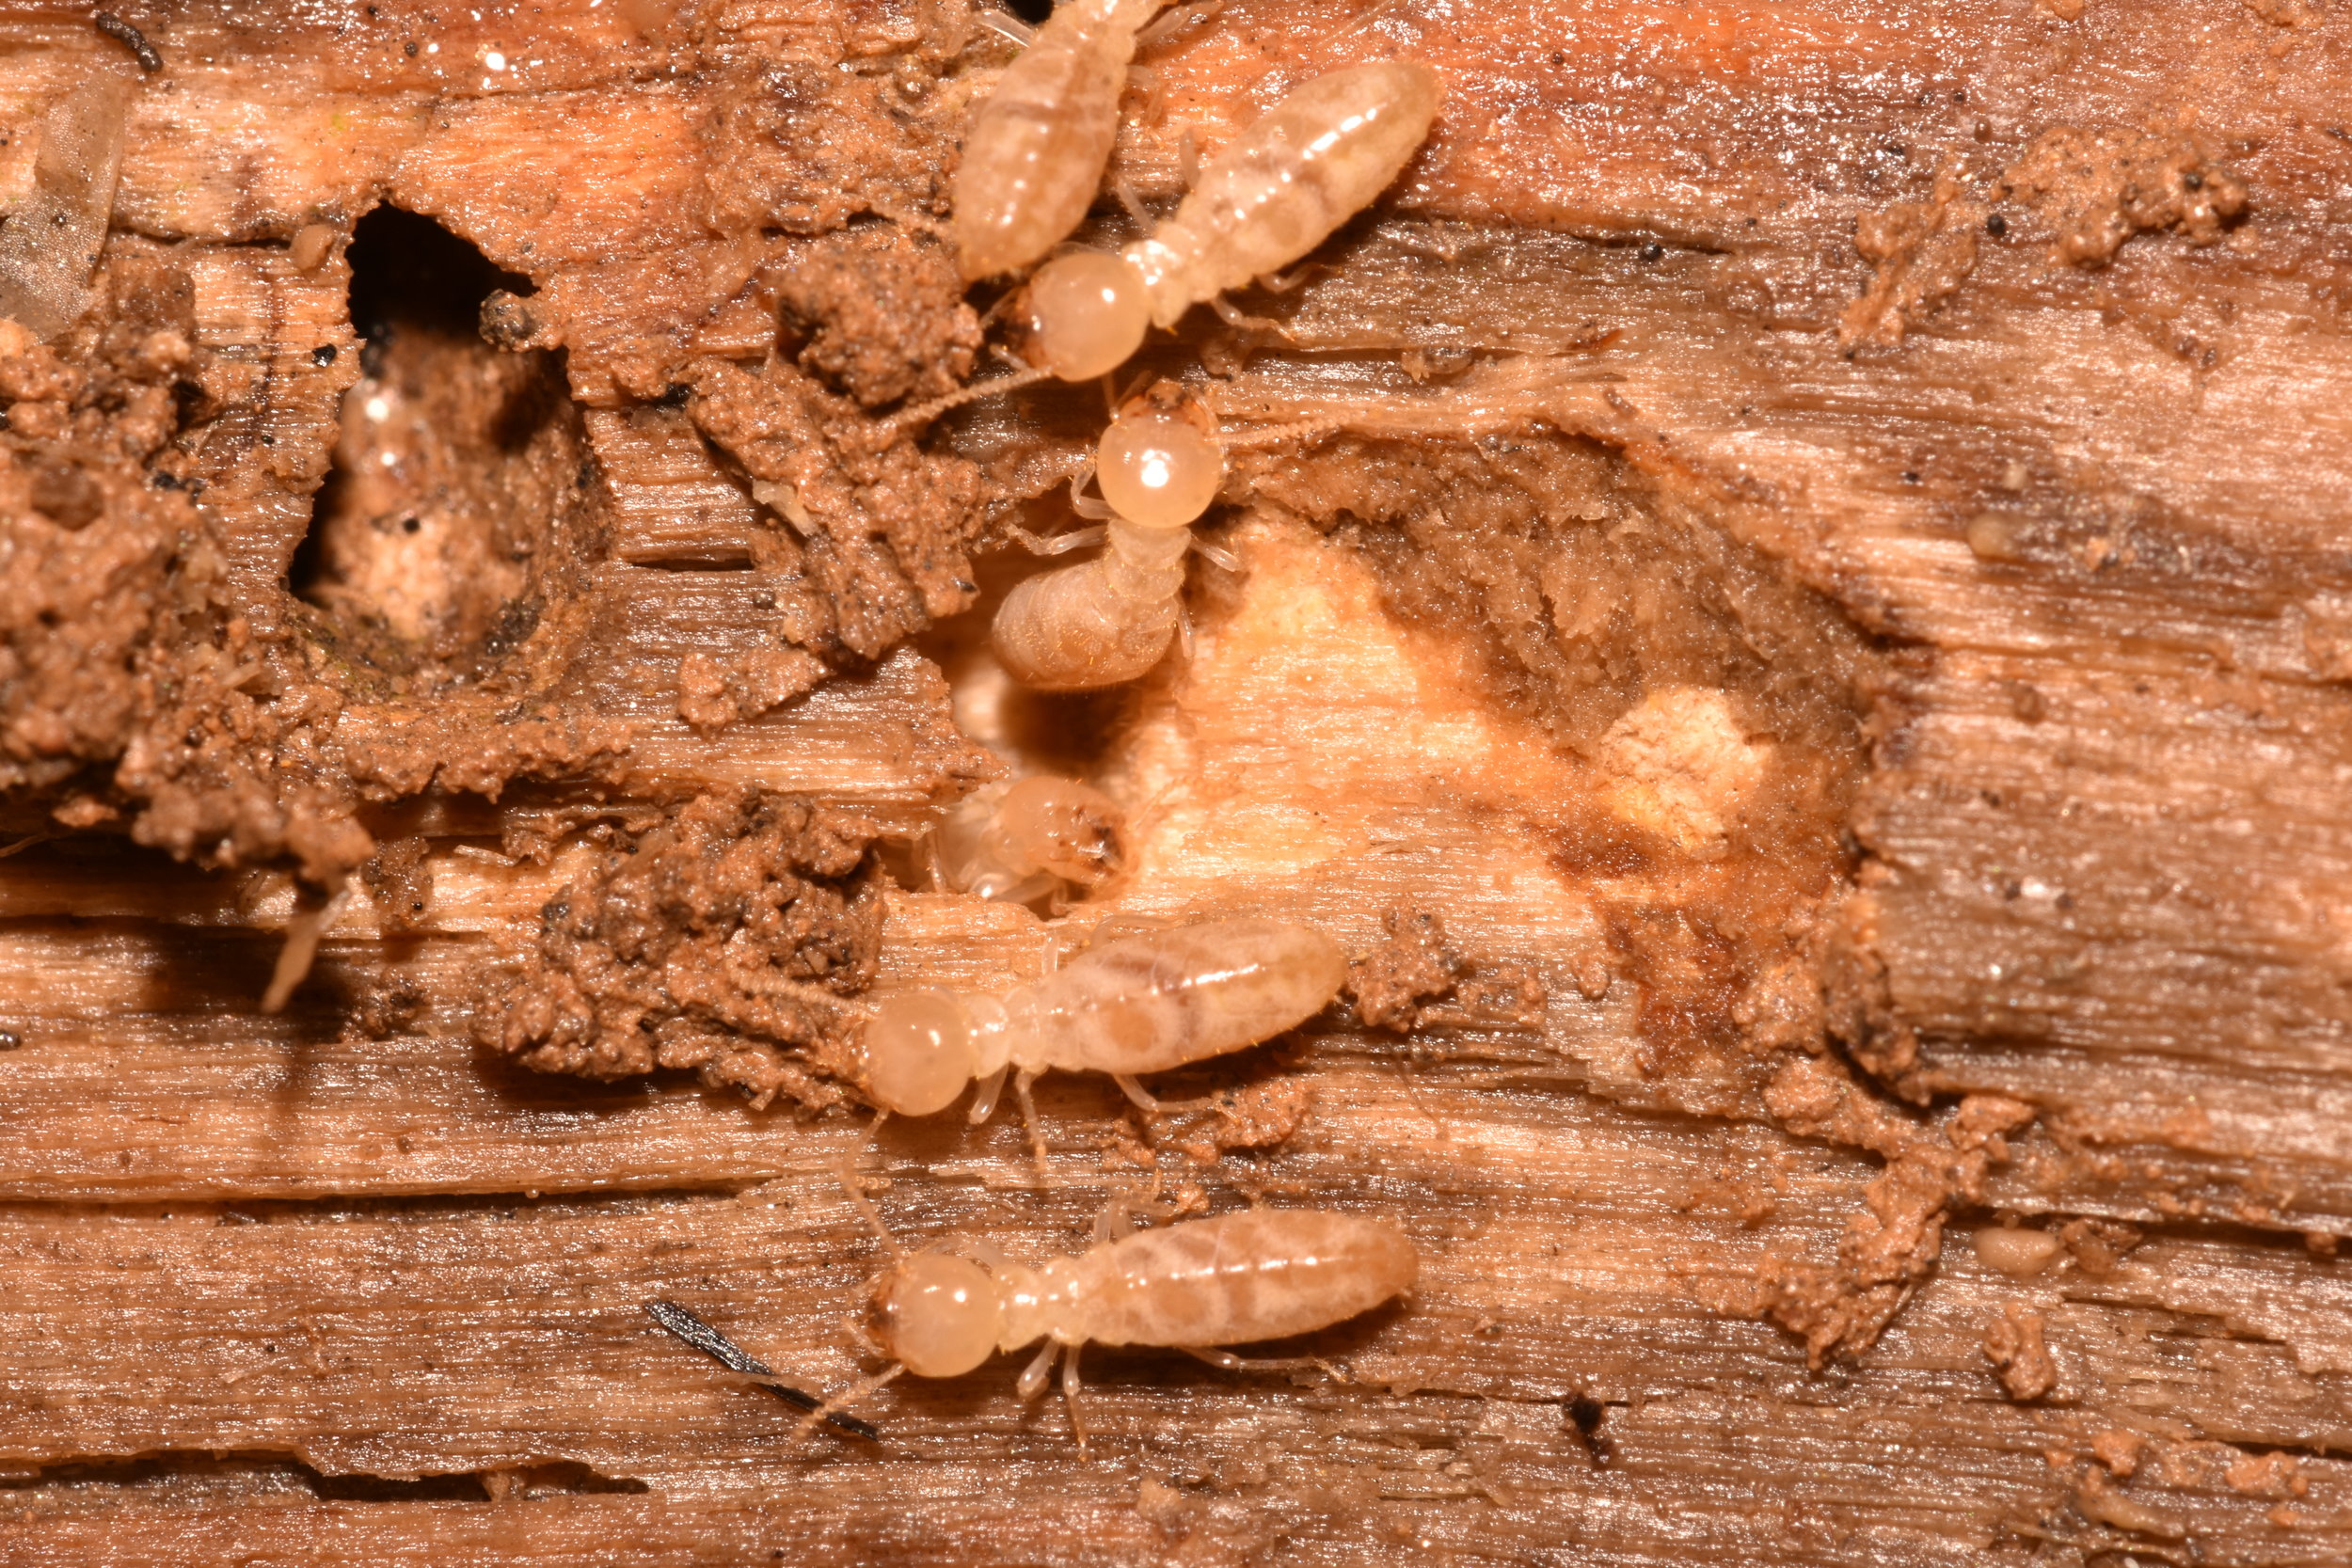 What Are The Different Types Of Termite Treatment Options Offered In Pike Creek DE?